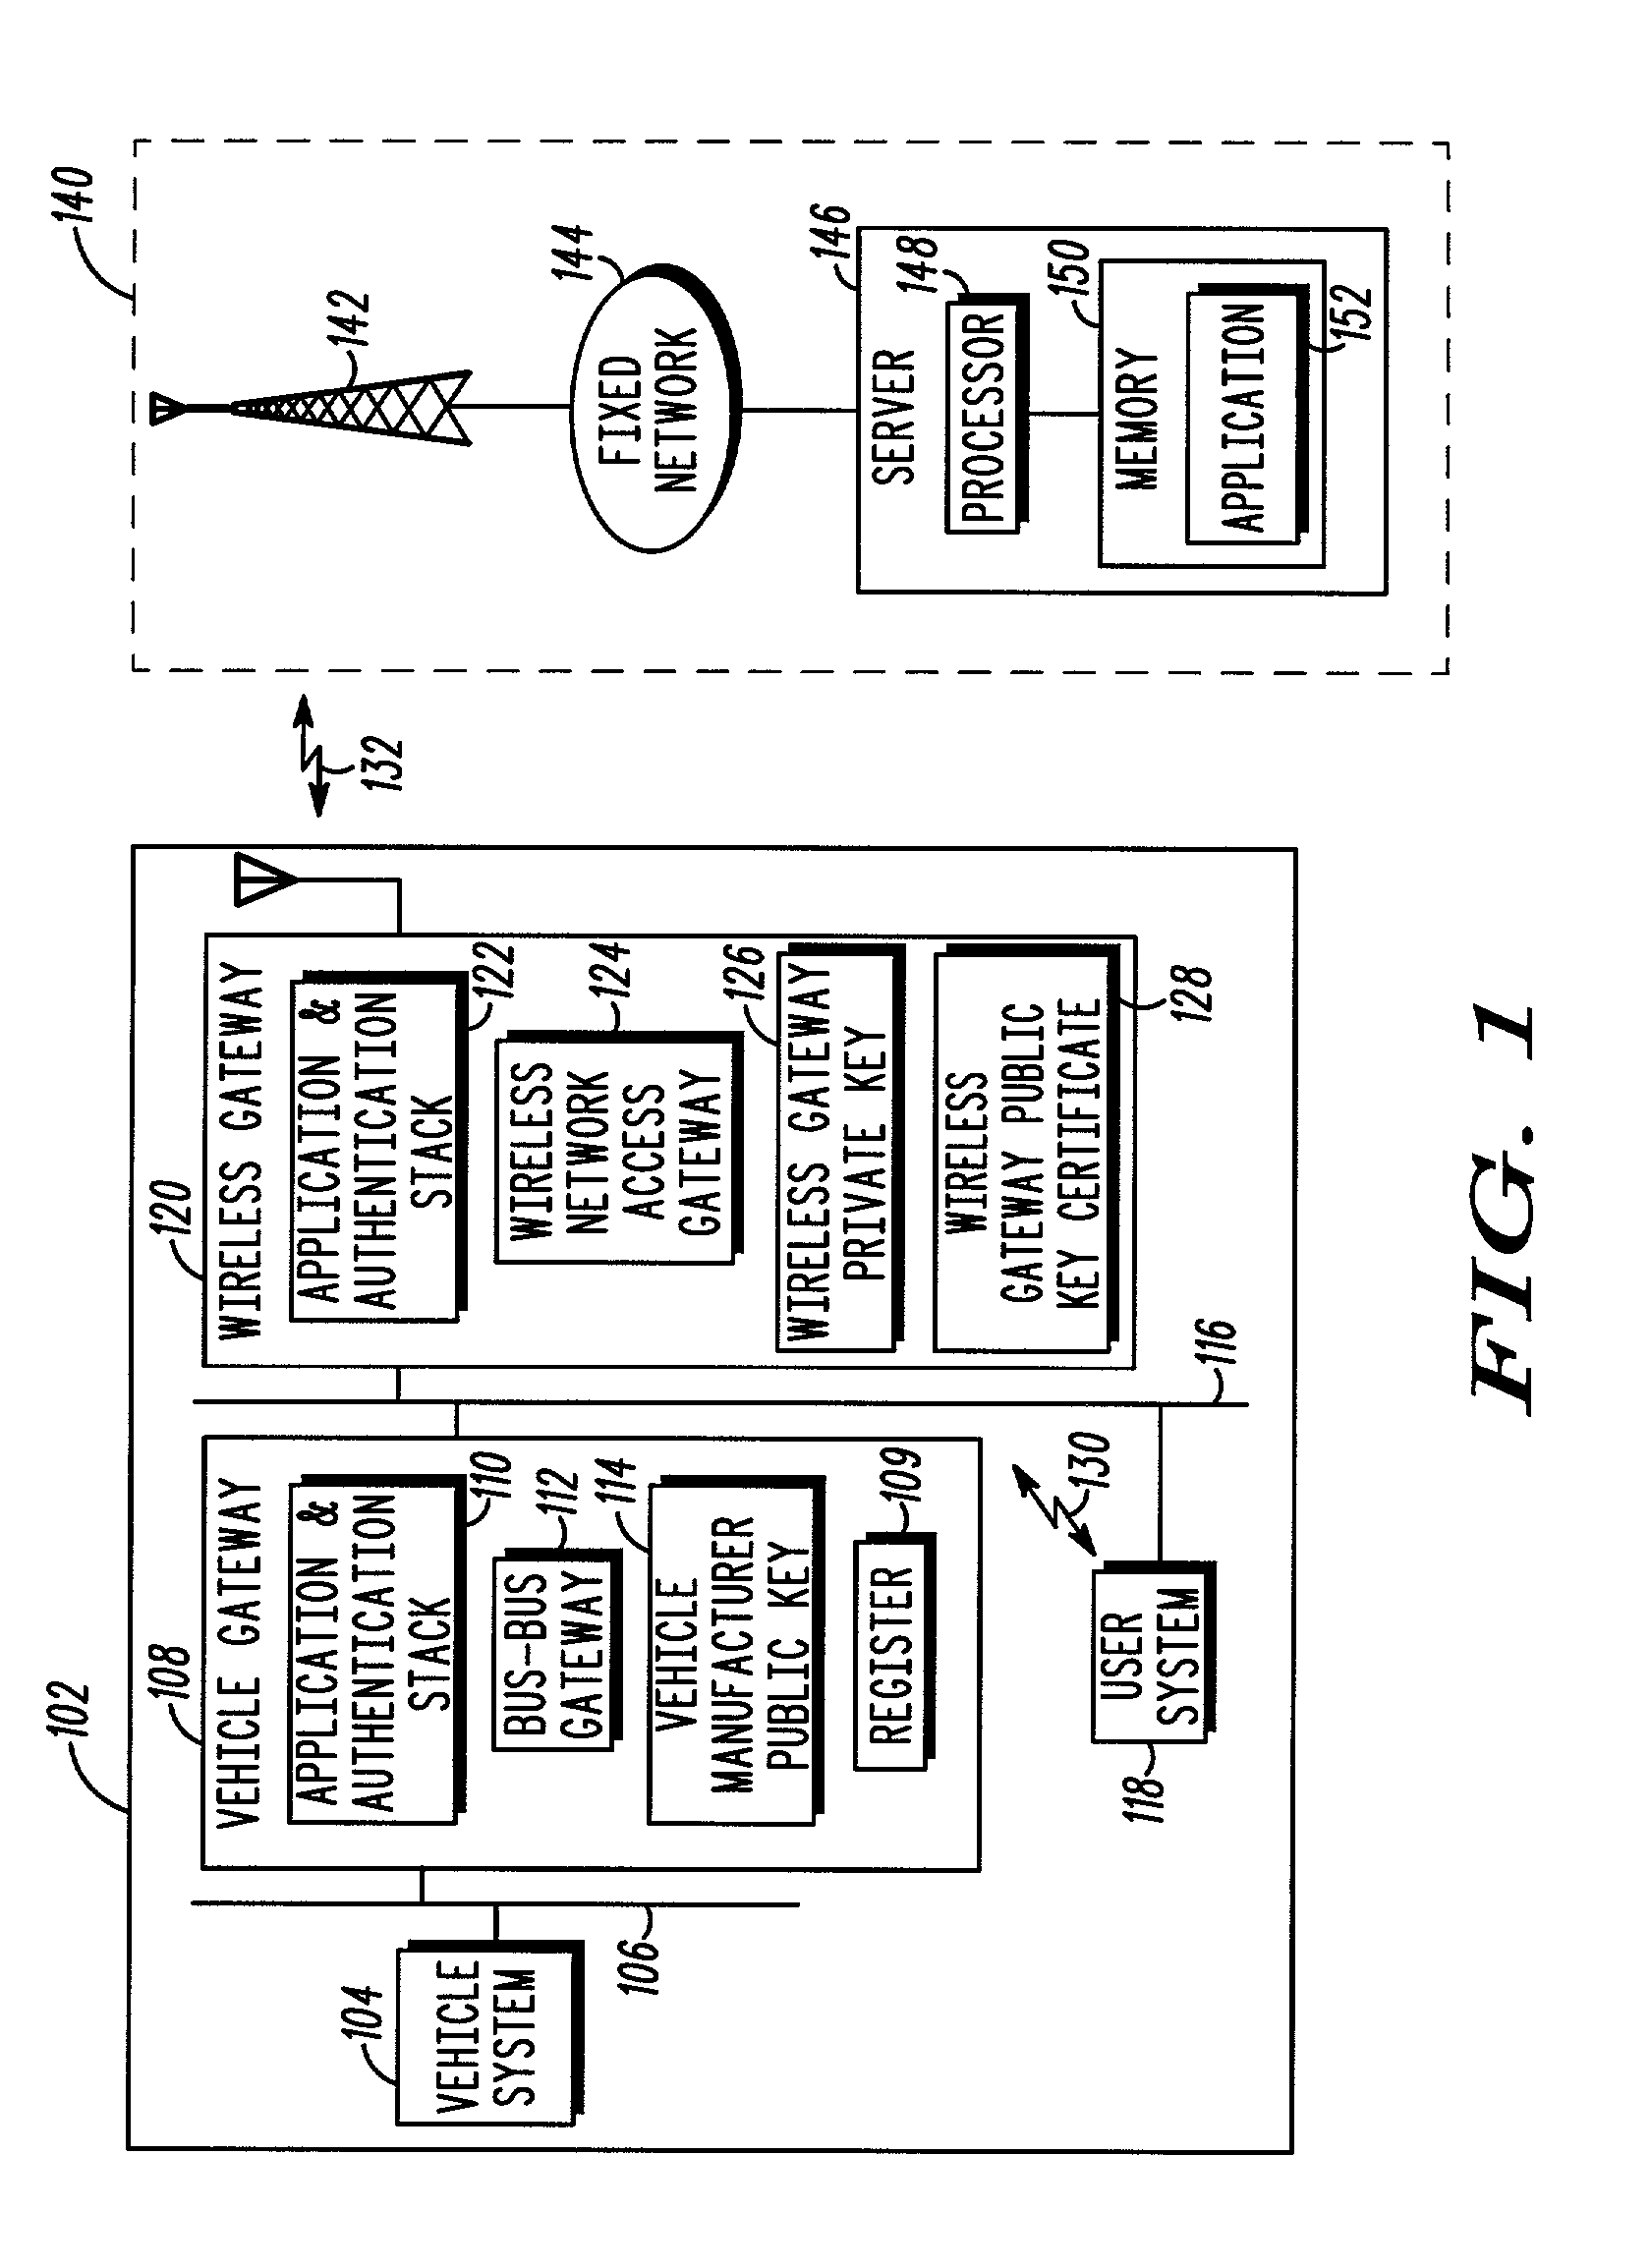 Method and apparatus for in-vehicle device authentication and secure data delivery in a distributed vehicle network